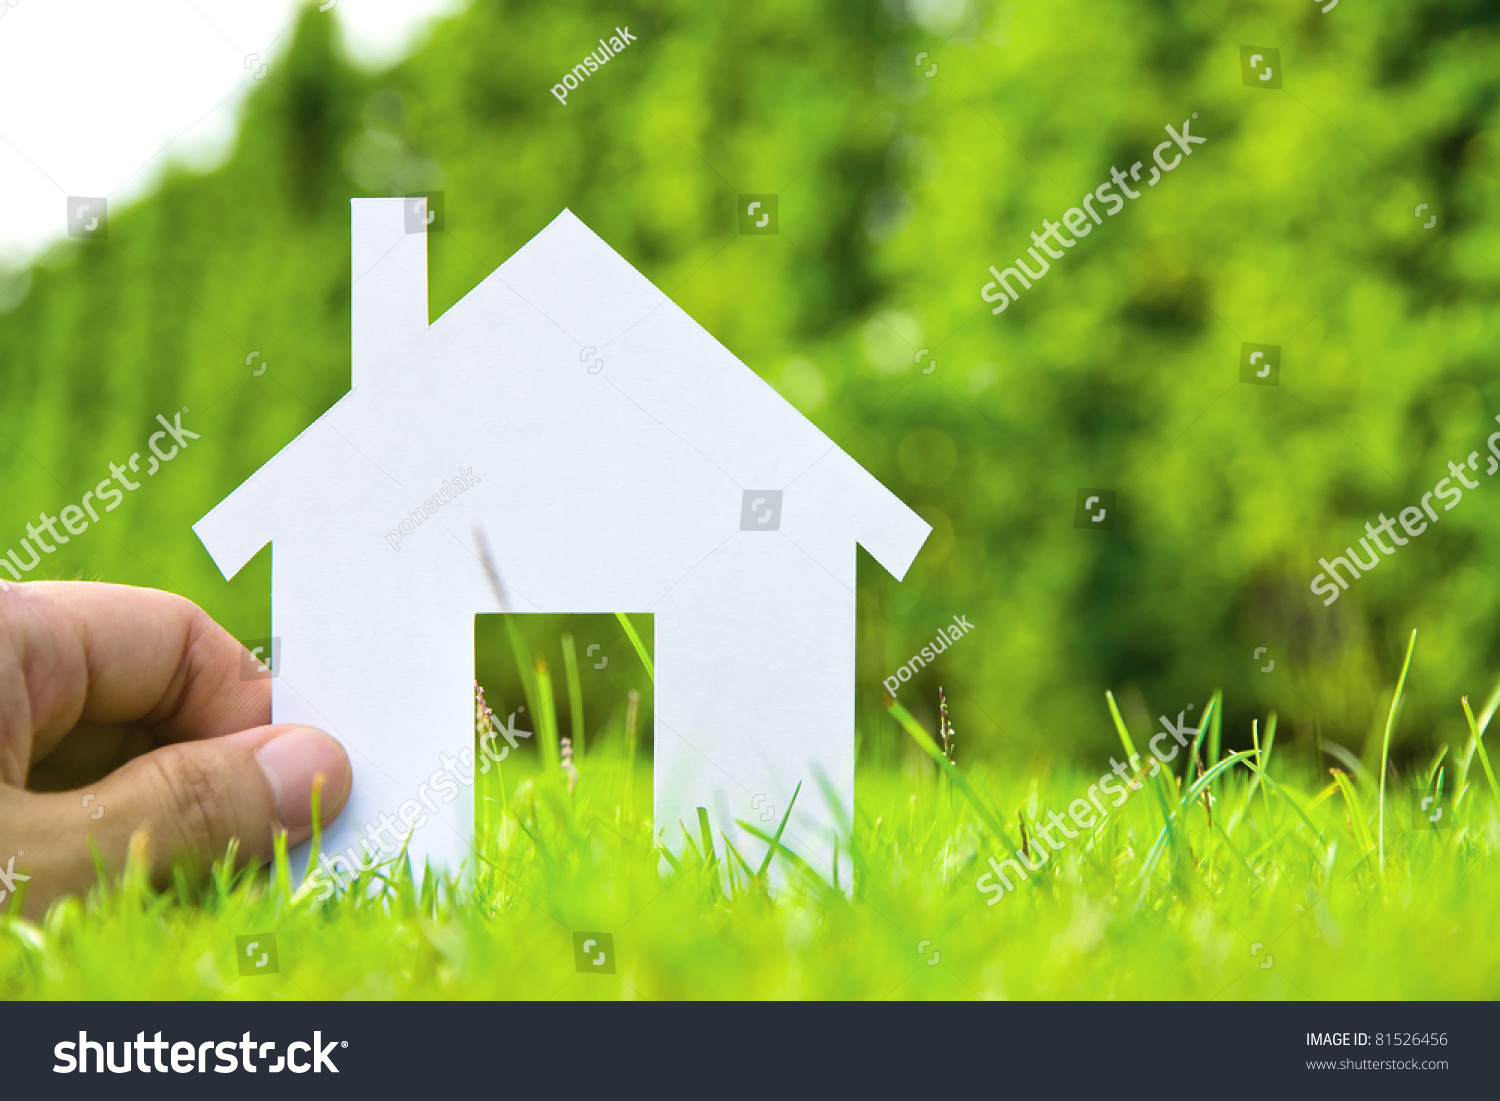 Concept Image Of Make Your House Stock Photo 81526456 : Shutterstock